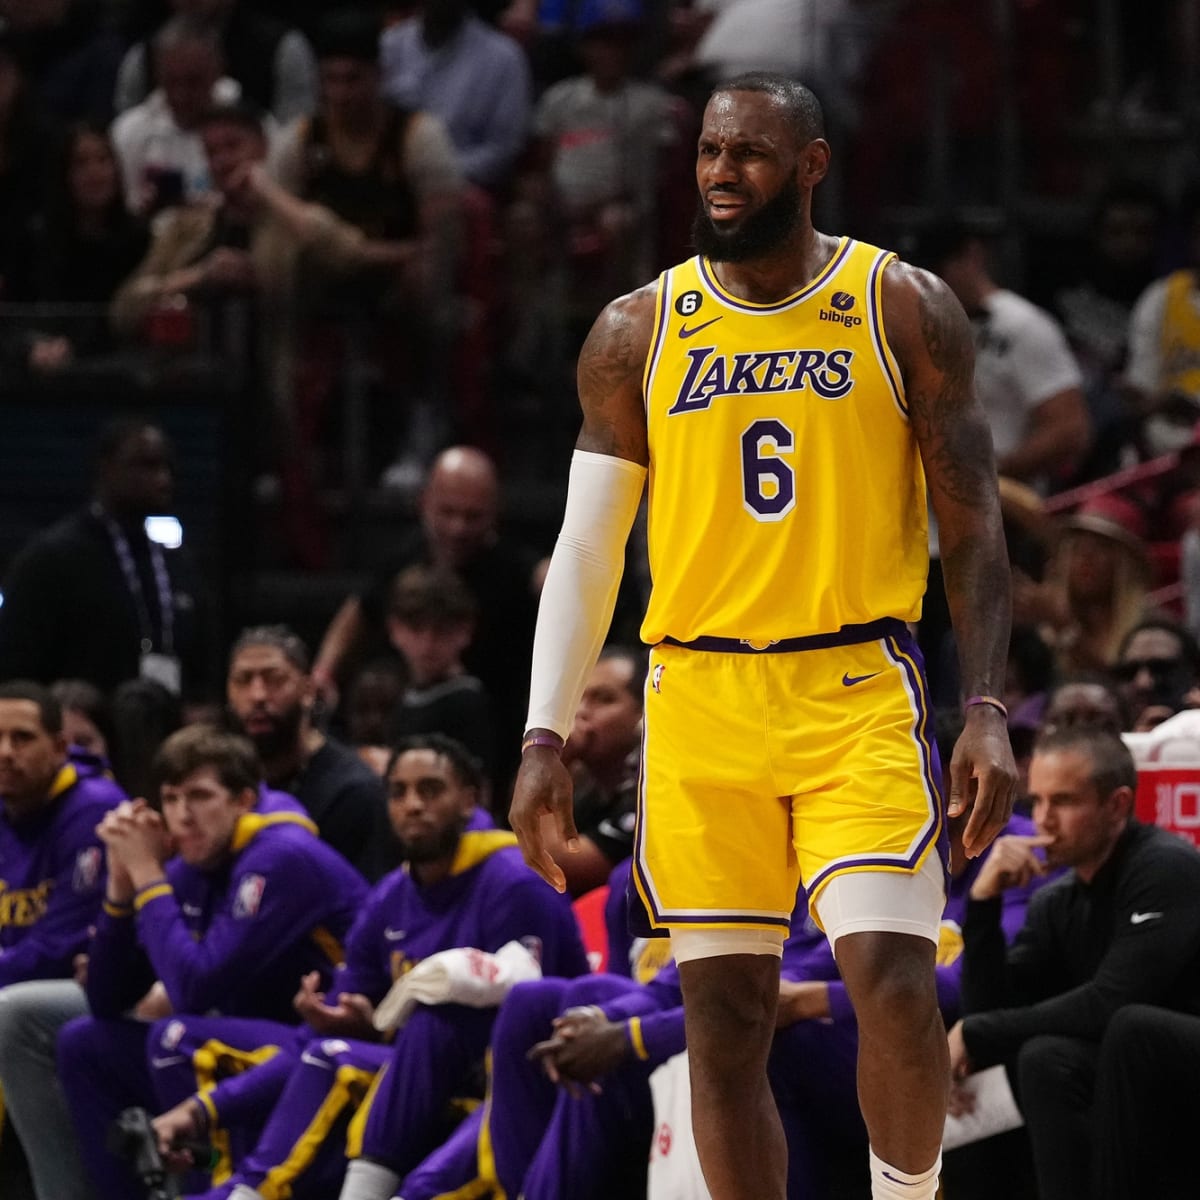 LeBron James denies Lakers frustration: 'My patience isn't waning